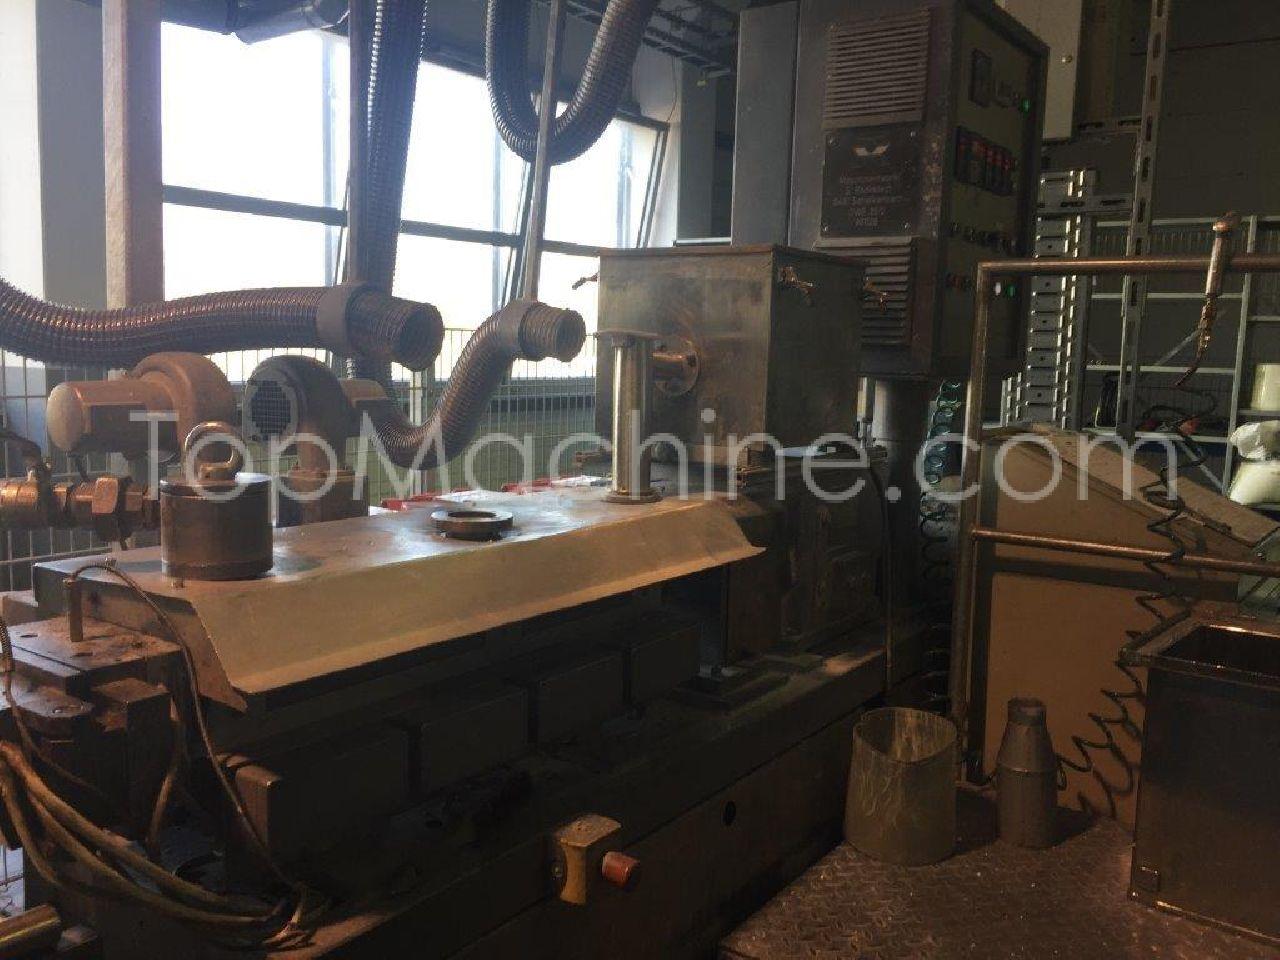 Used Rockstedt 55 2 Compoundiermaschinen Compounding-Anlage